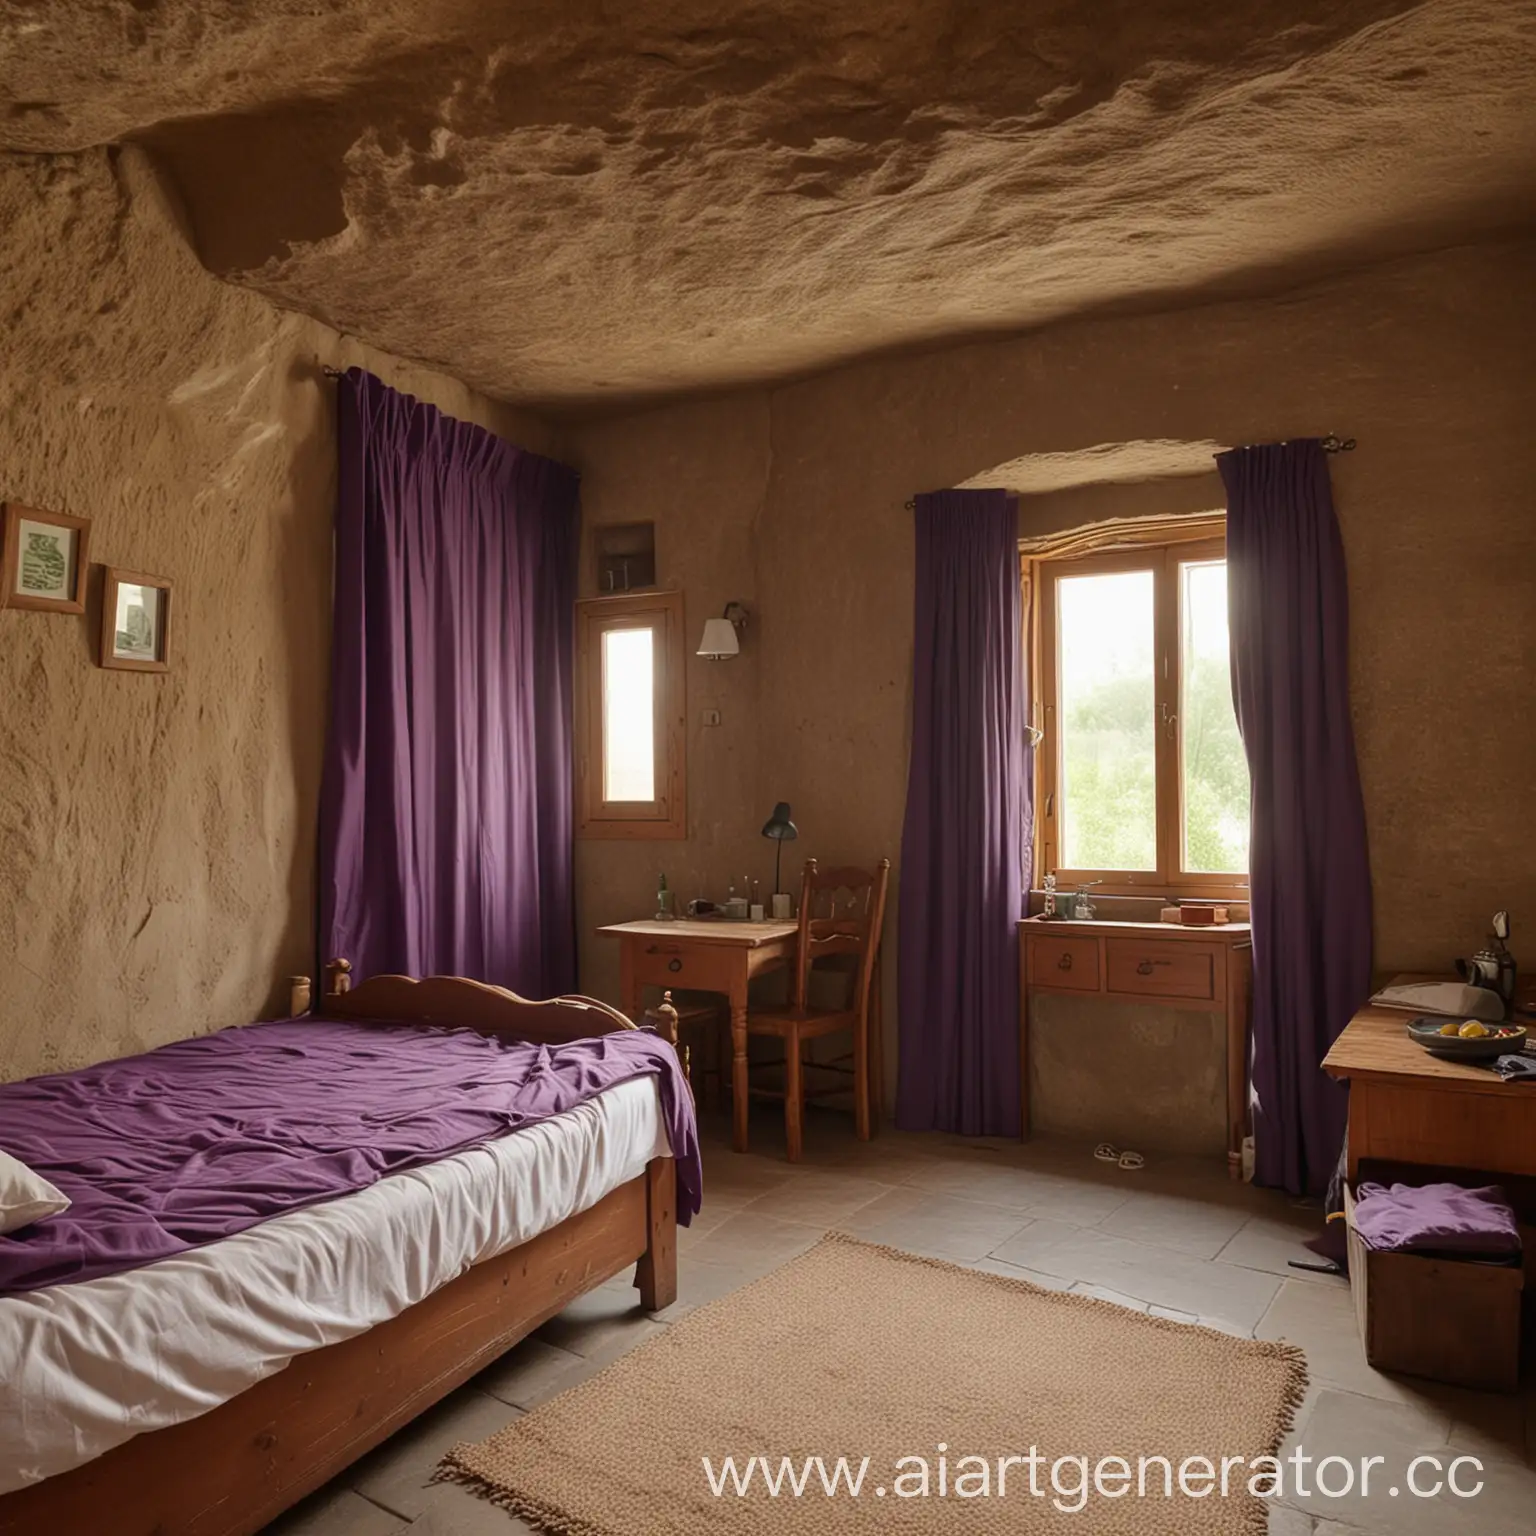 The cave is clean and cosy. There two wide windows, one brown door in the cave. The purple curtains on the windows are very nice. There  is a small brown table near the window and there is big  green bed near the cupboard.